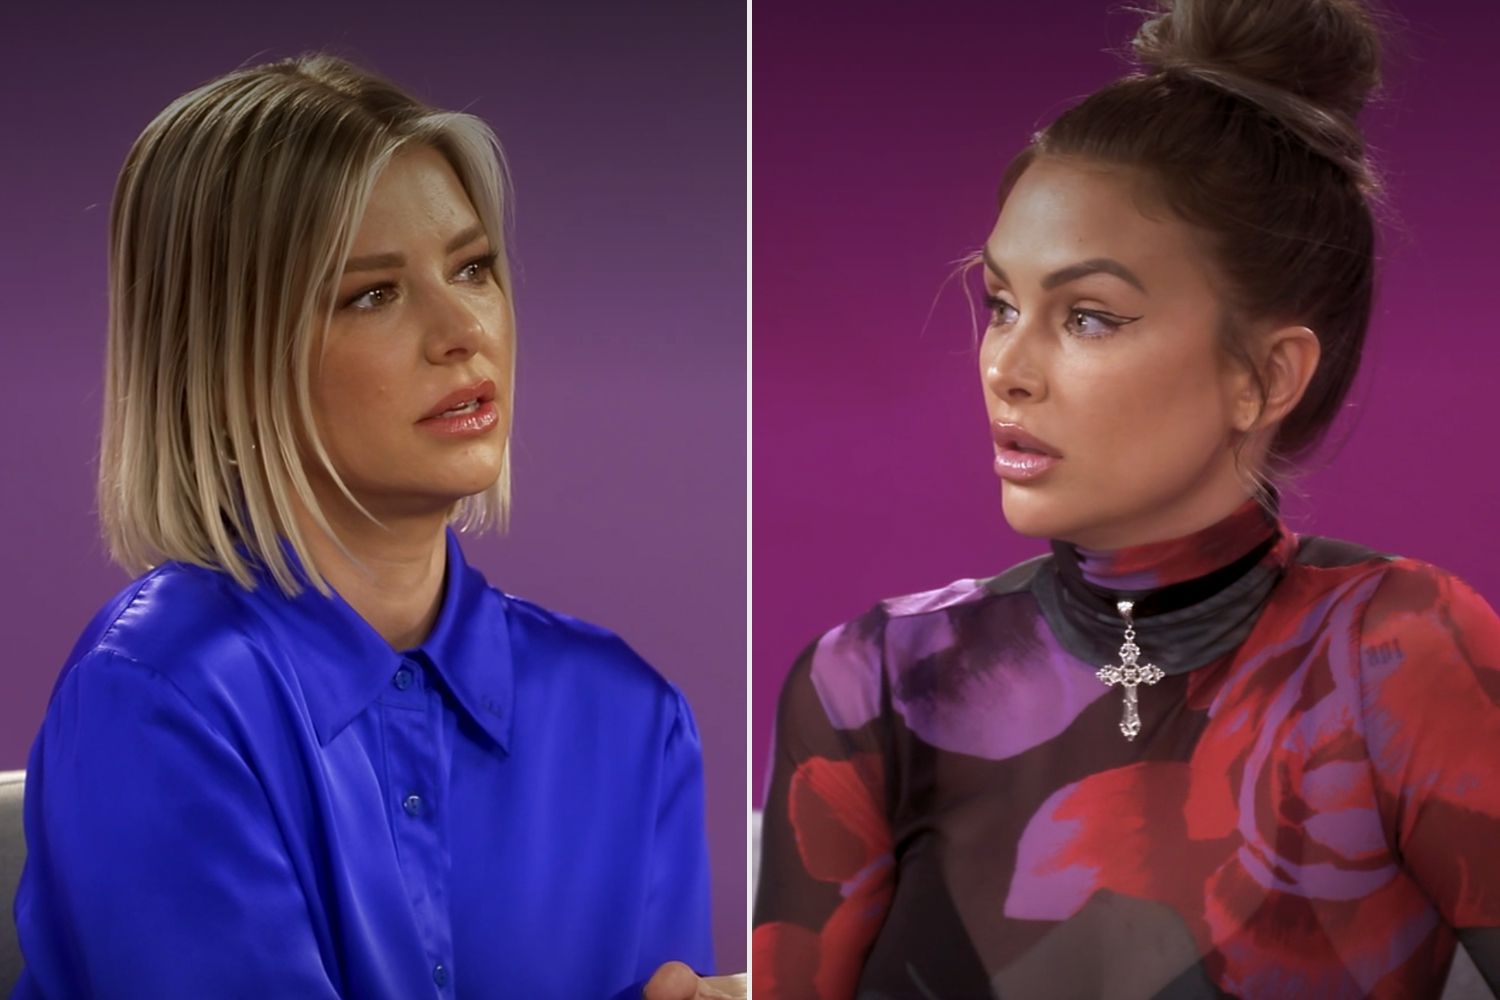 Lala Kent Calls Out Ariana Madix for Ignoring Tom’s Rants Against ‘Vanderpump Rules’ Co-Stars While Seeking Their Support